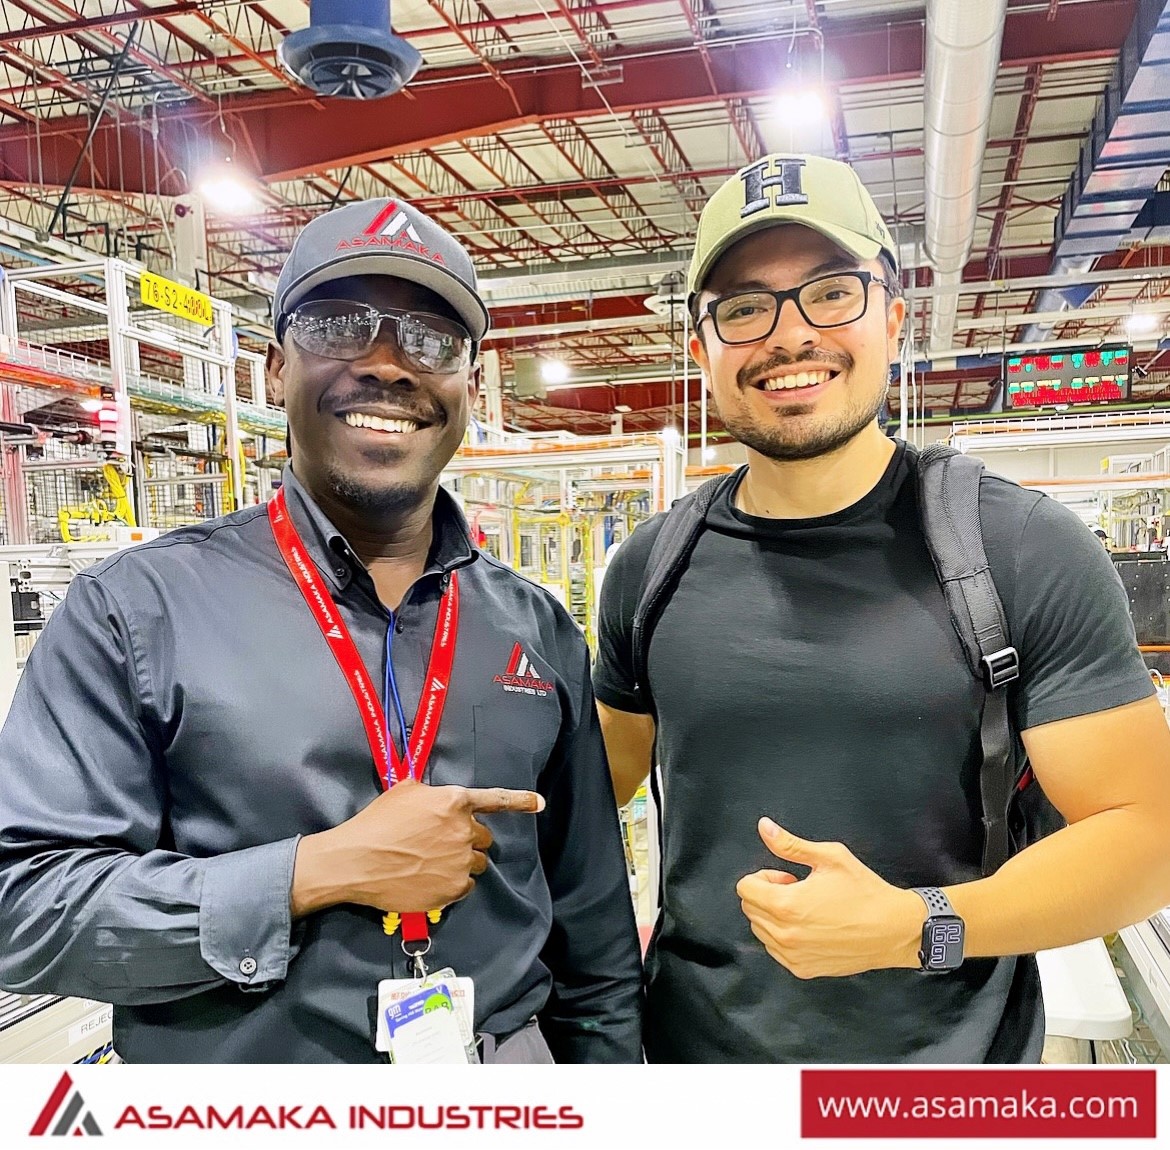 Celebrating the journey of collaboration with Irving. It's been a pleasure witnessing your robot programming expertise in action. Best of luck in your future endeavors!

#celebration #robotprogramming #programming #future #automation #eee #engineering #expert #asamakaindustries